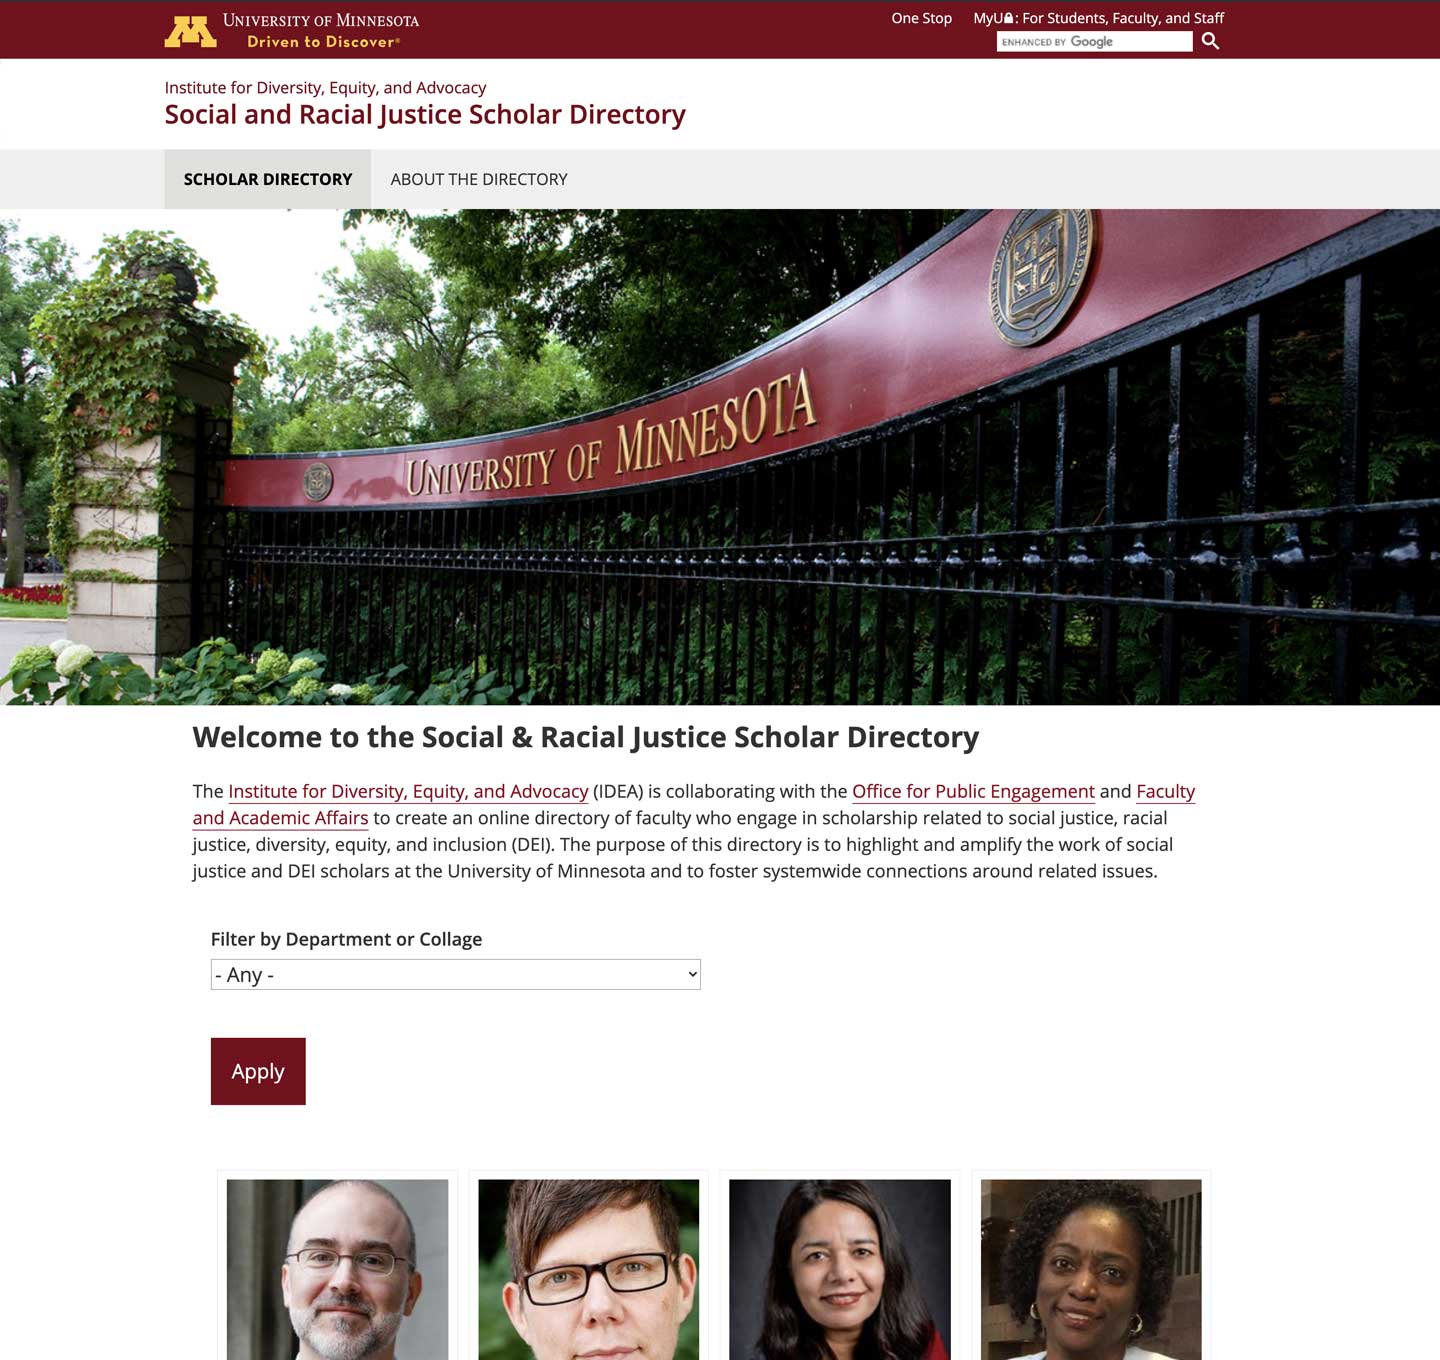 Social and Racial Justice Scholar Directory website home page